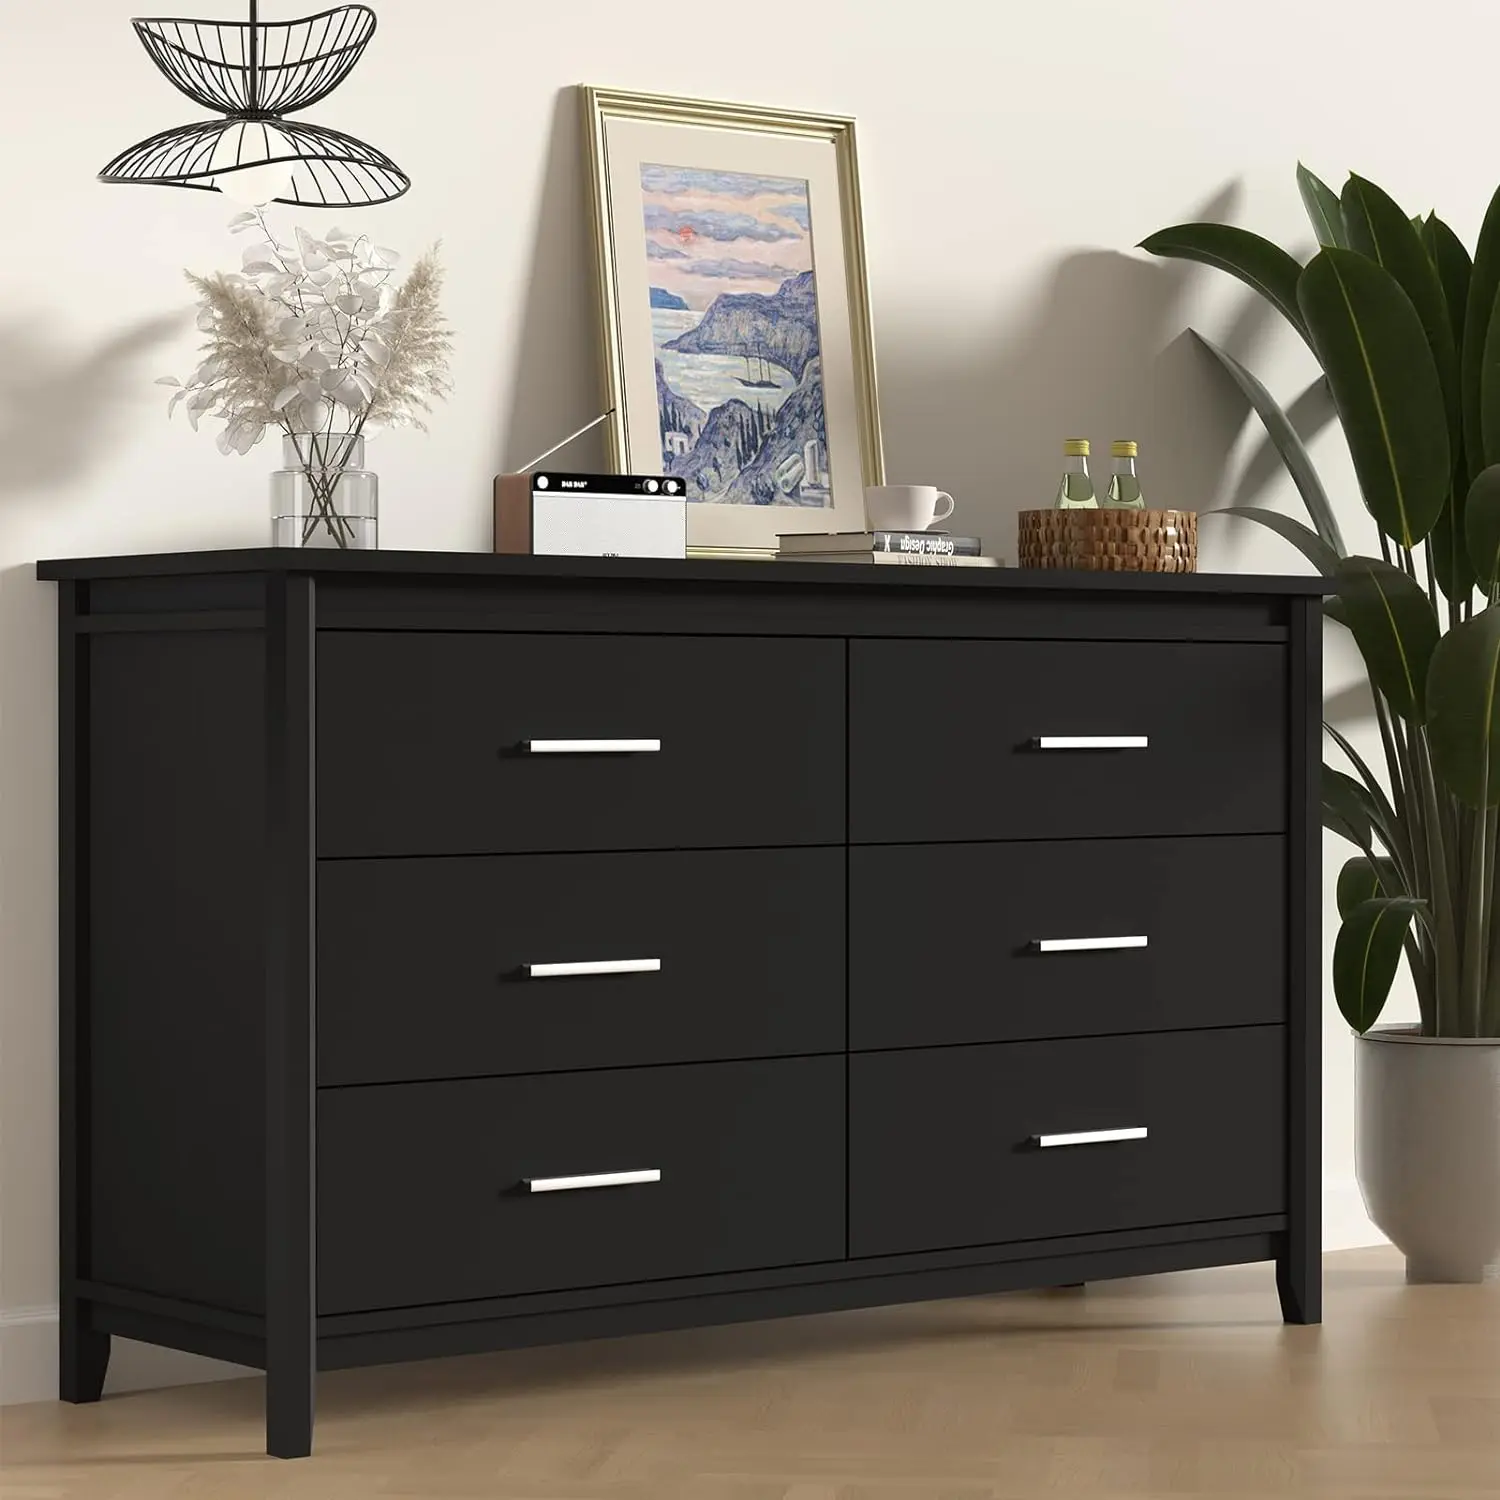 

6 Drawers Double Wood Dresser, Wide Chest of Drawer with Metal Handles, TV Stand & Storage Cabinet for Bedroom Living Room